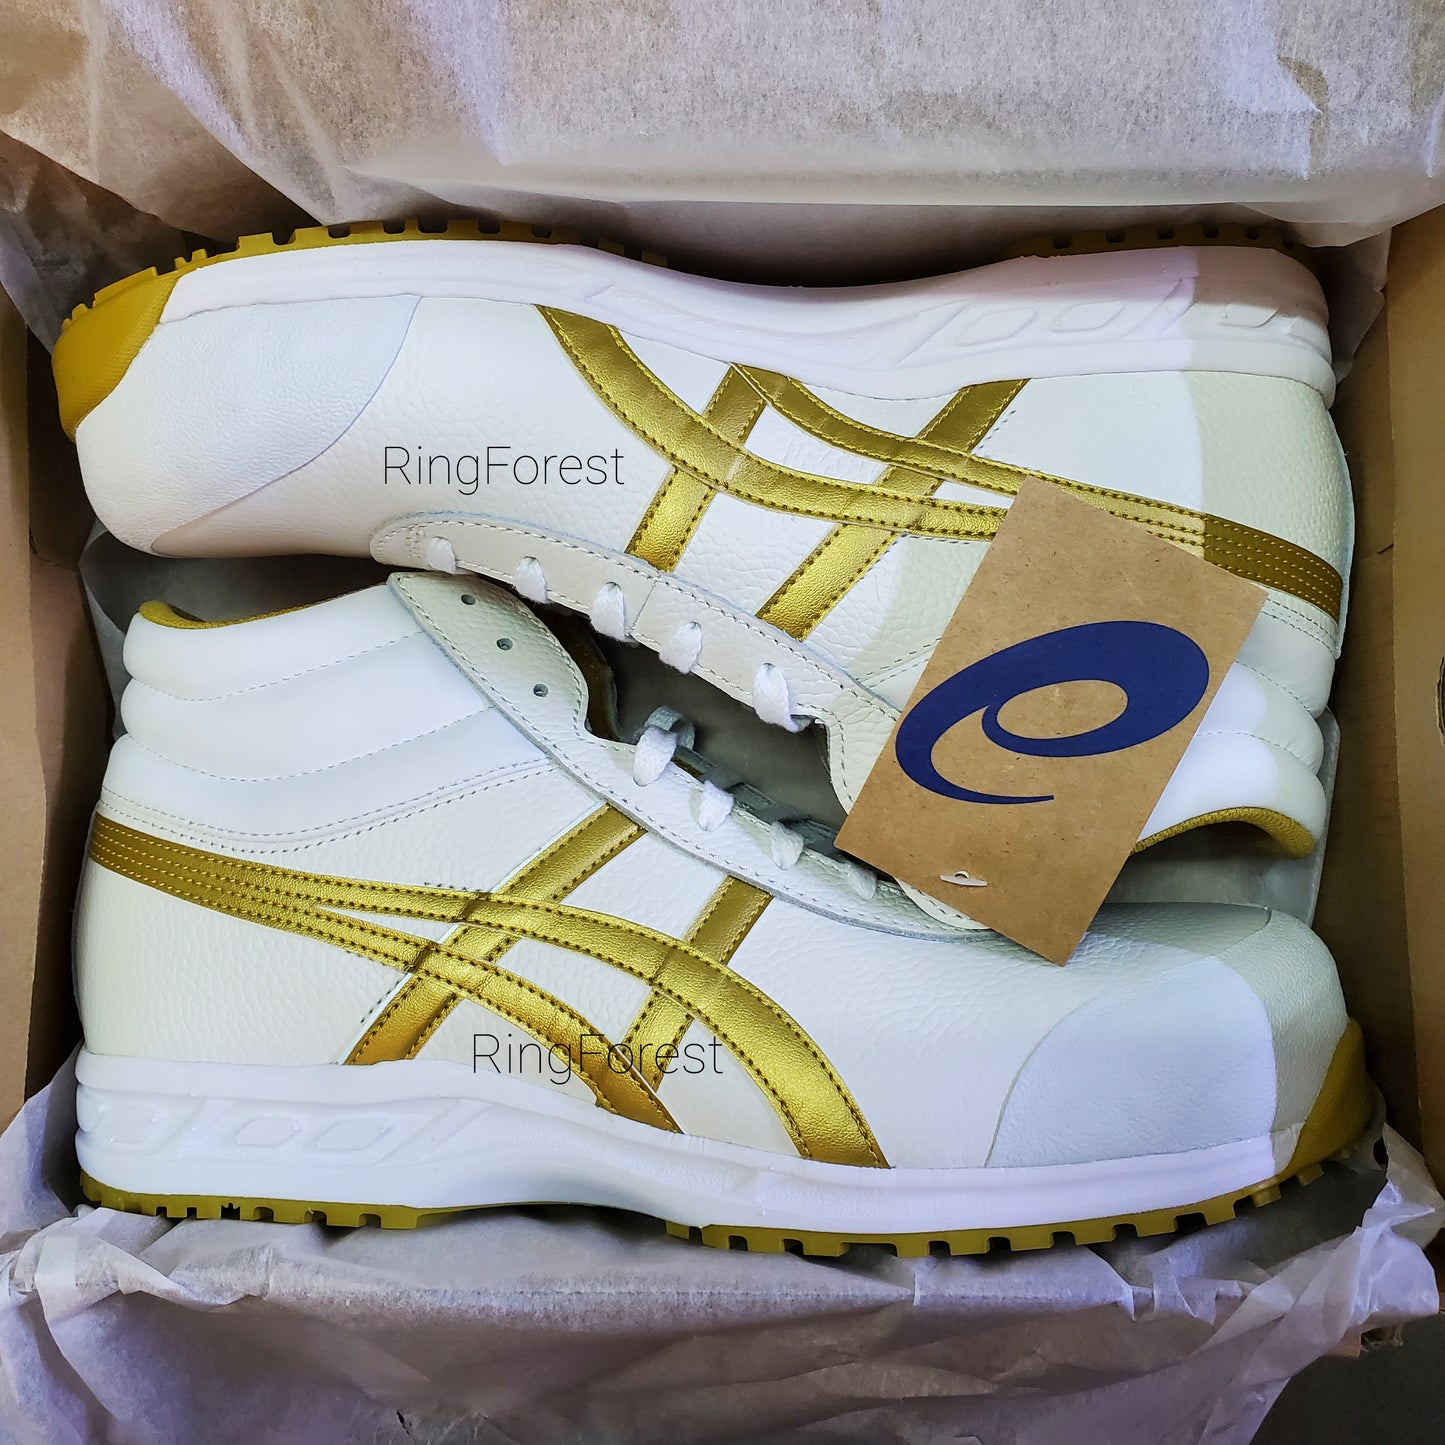 Made in Japan [Ready stock▪️Ready to ship] ASICS genuine leather nail-proof safety shoes gold and white EU44 27.5cm 71S JIS T8101